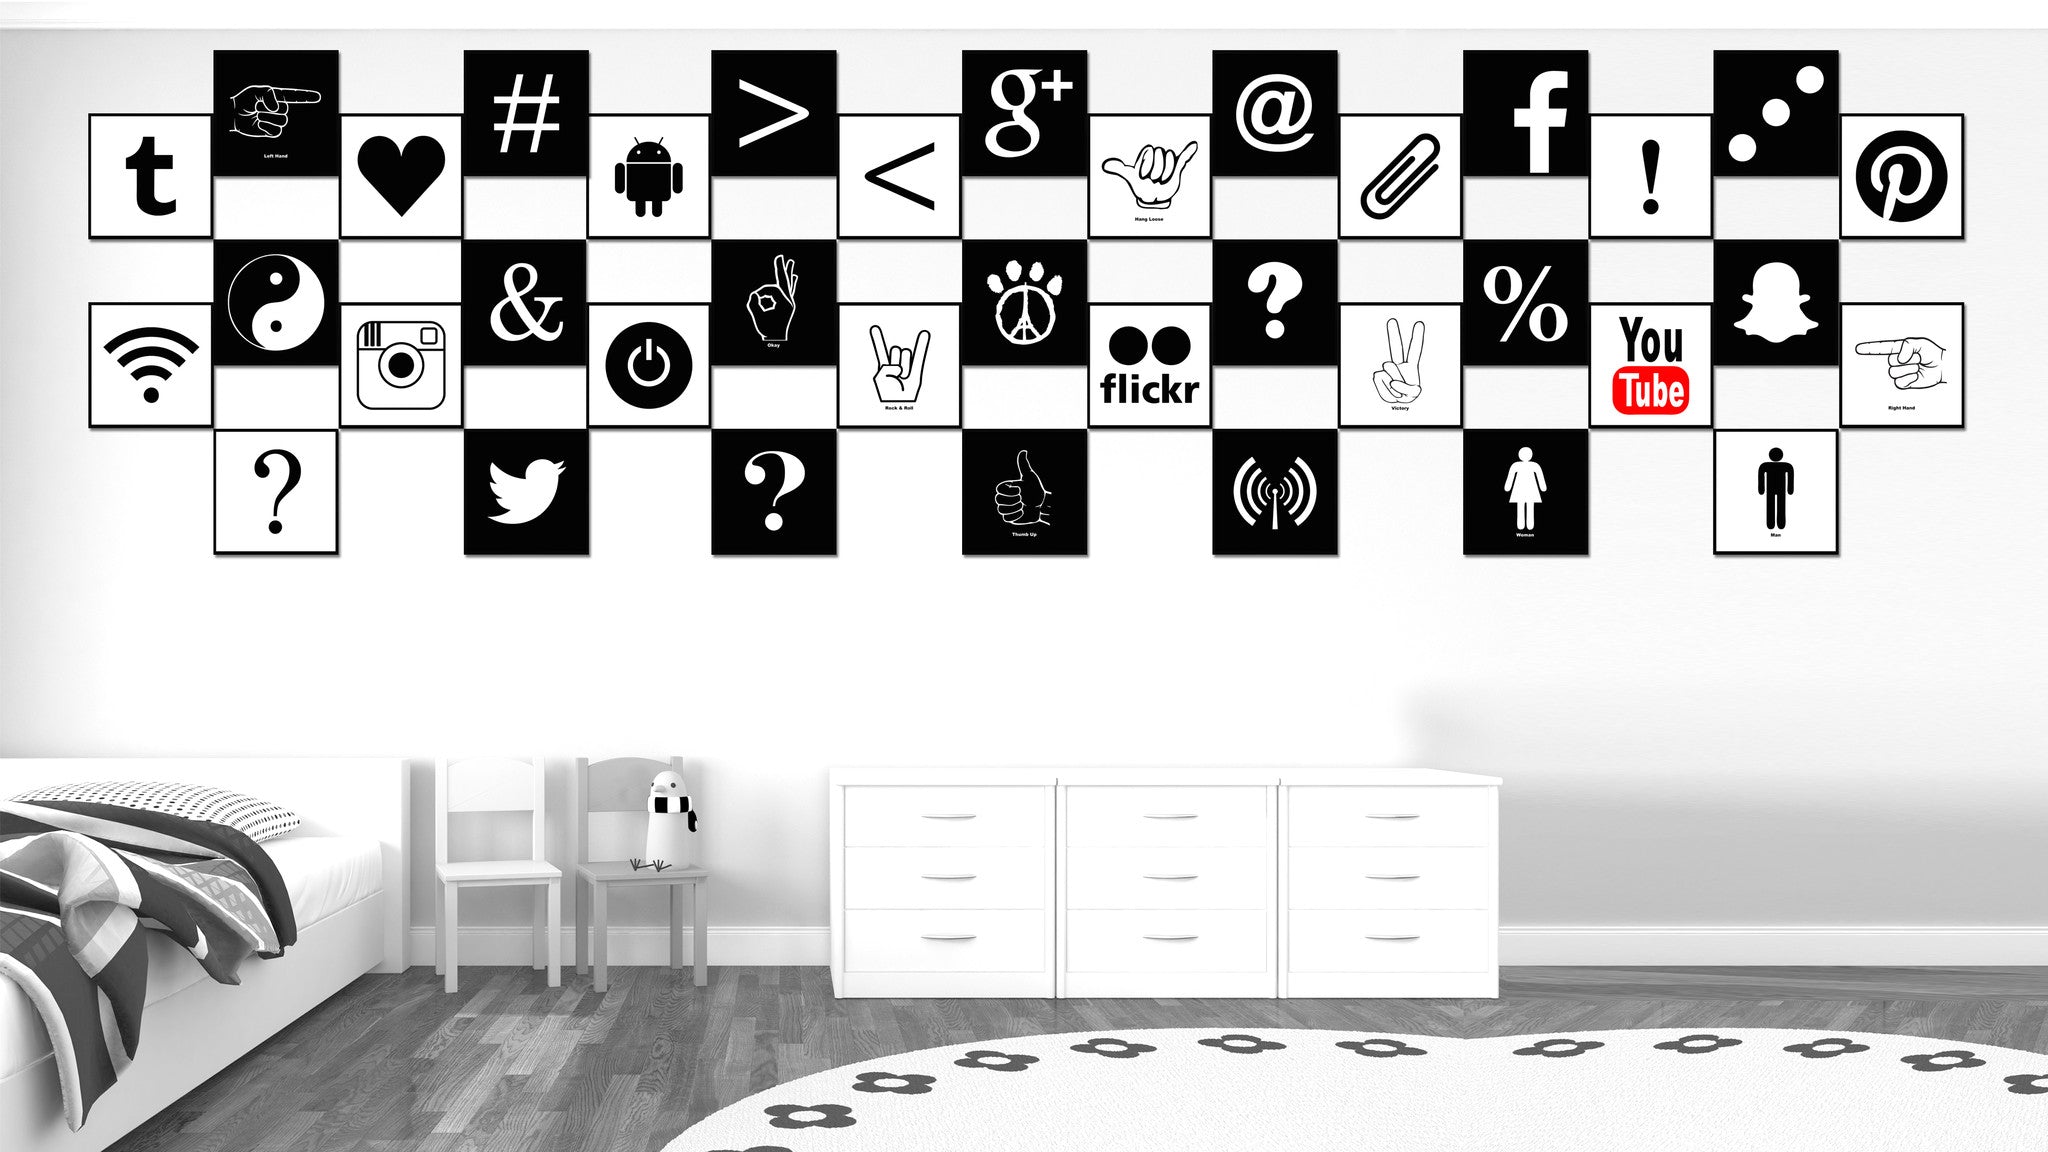 Left Hand Social Media Icon Canvas Print Picture Frame Wall Art Home Decor